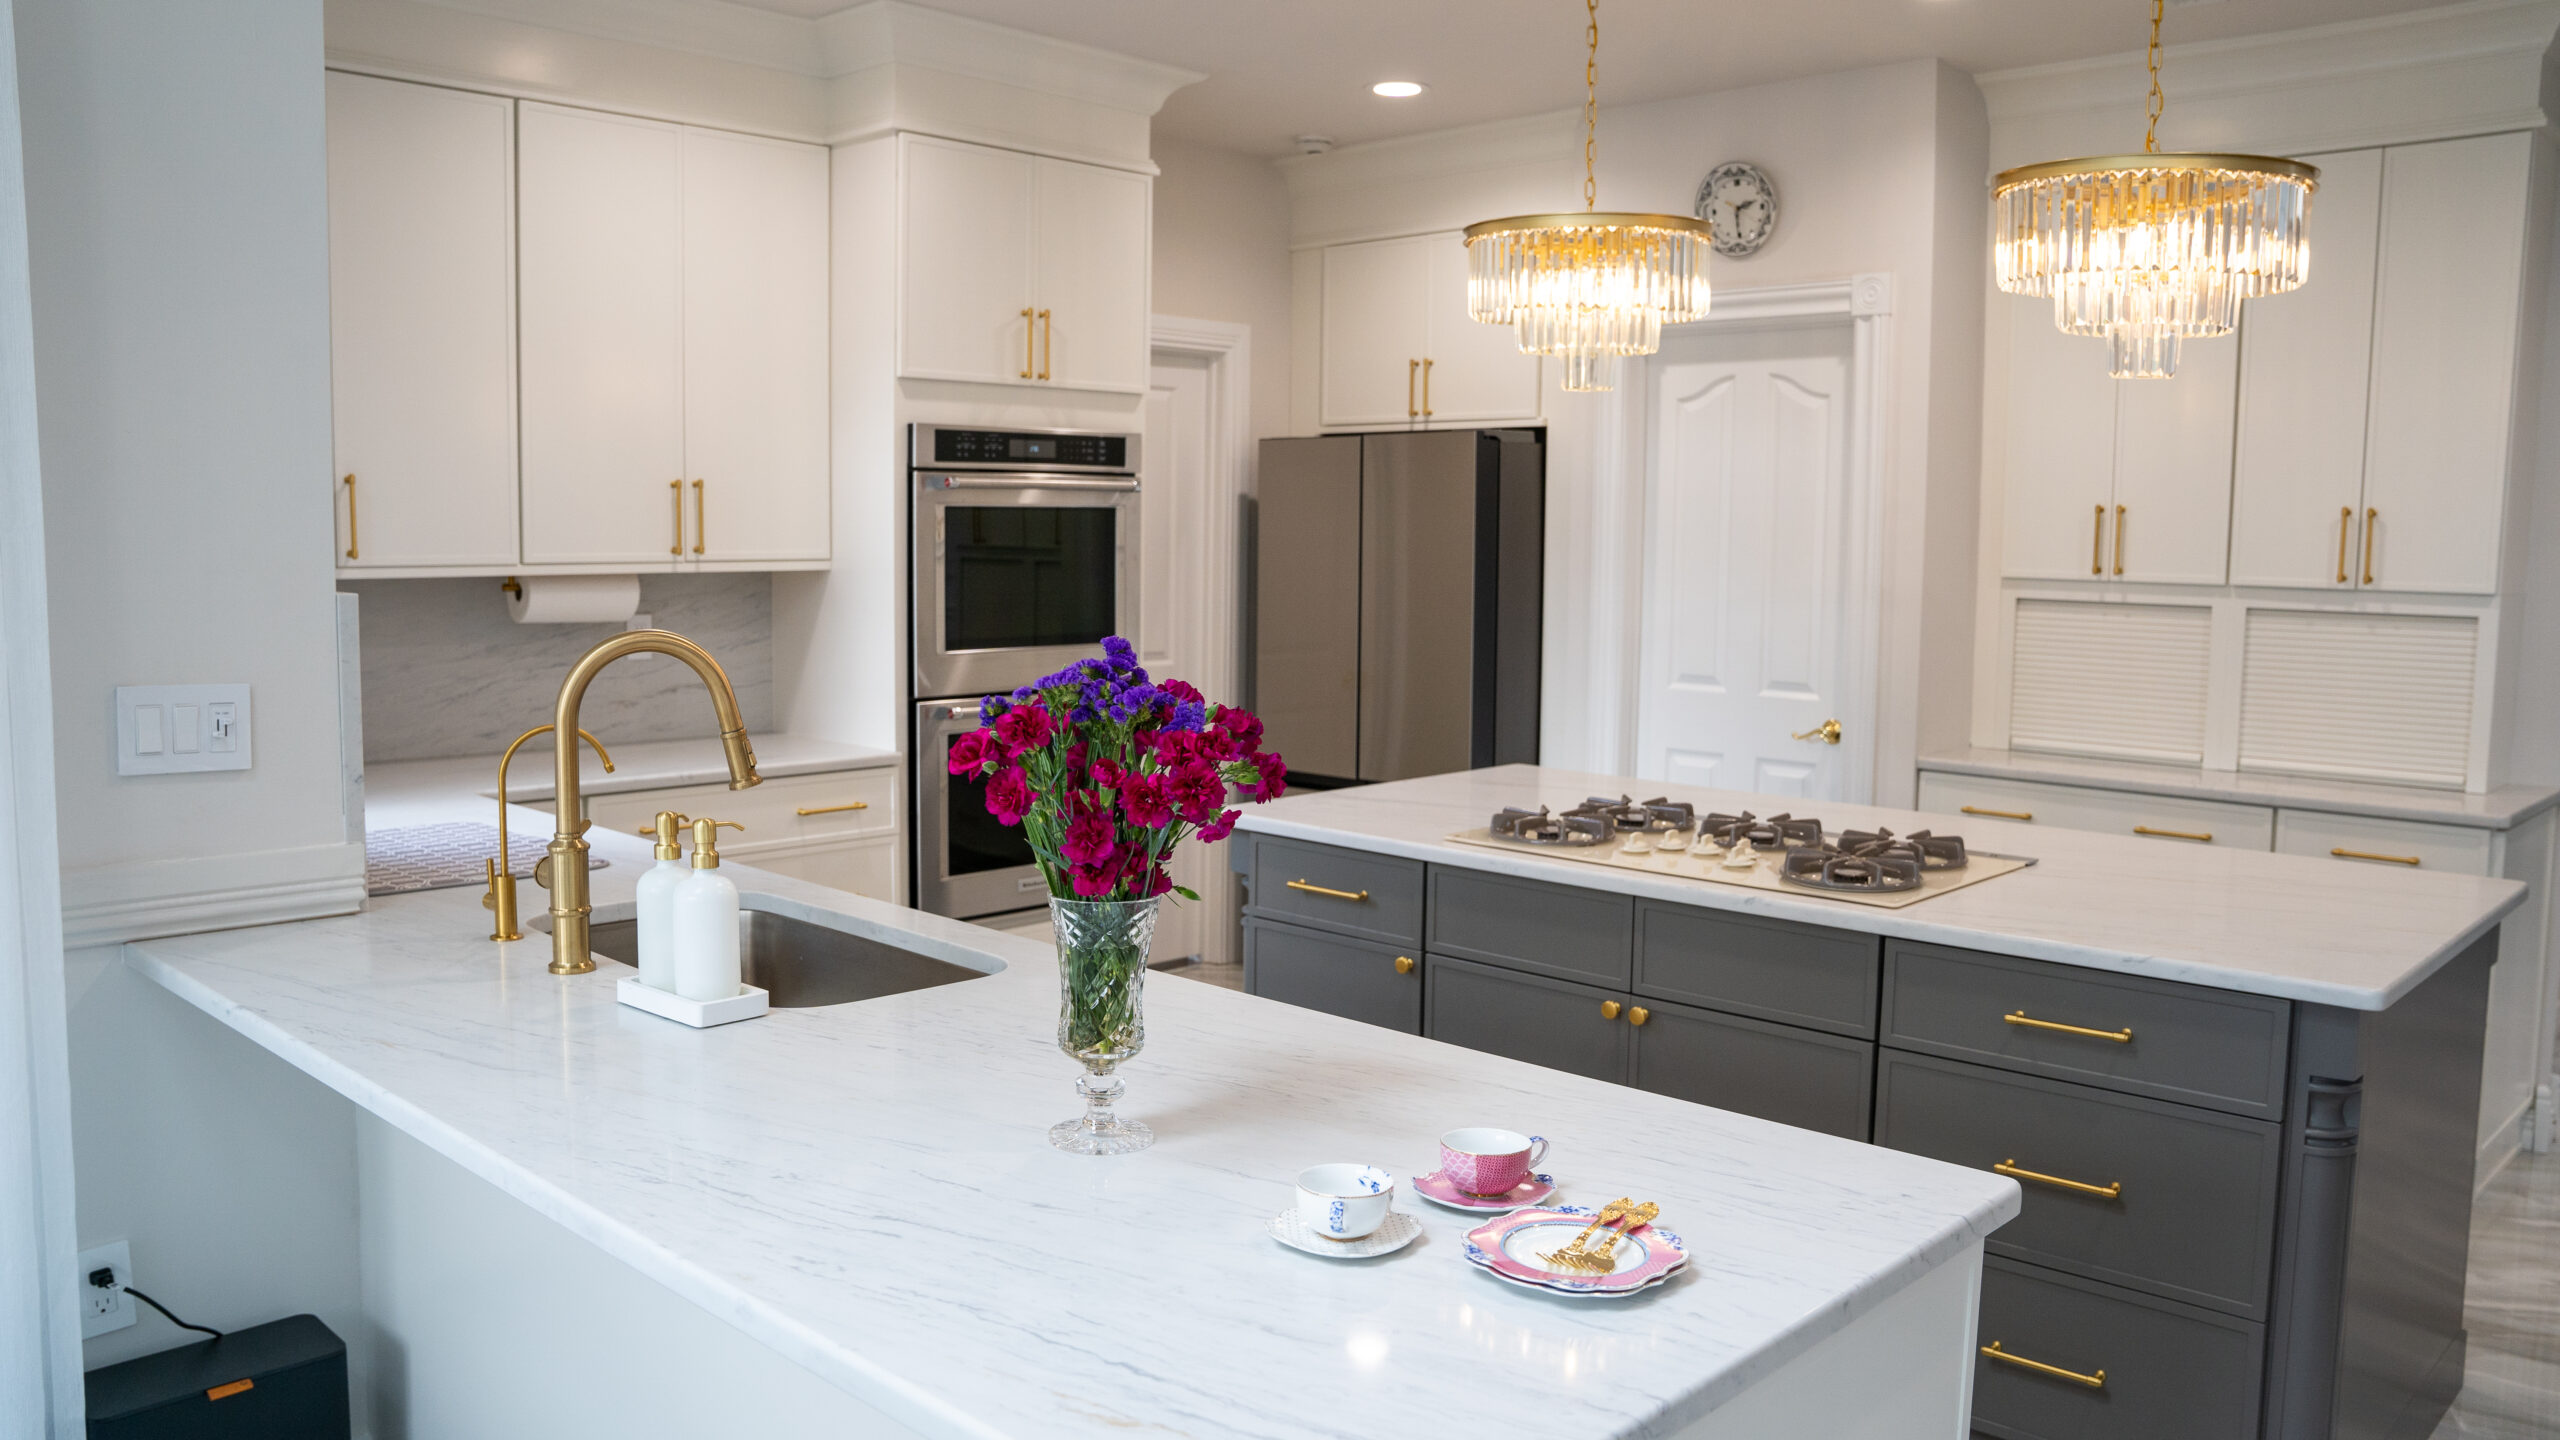 Luxury kitchen style with white cabinets and countertops